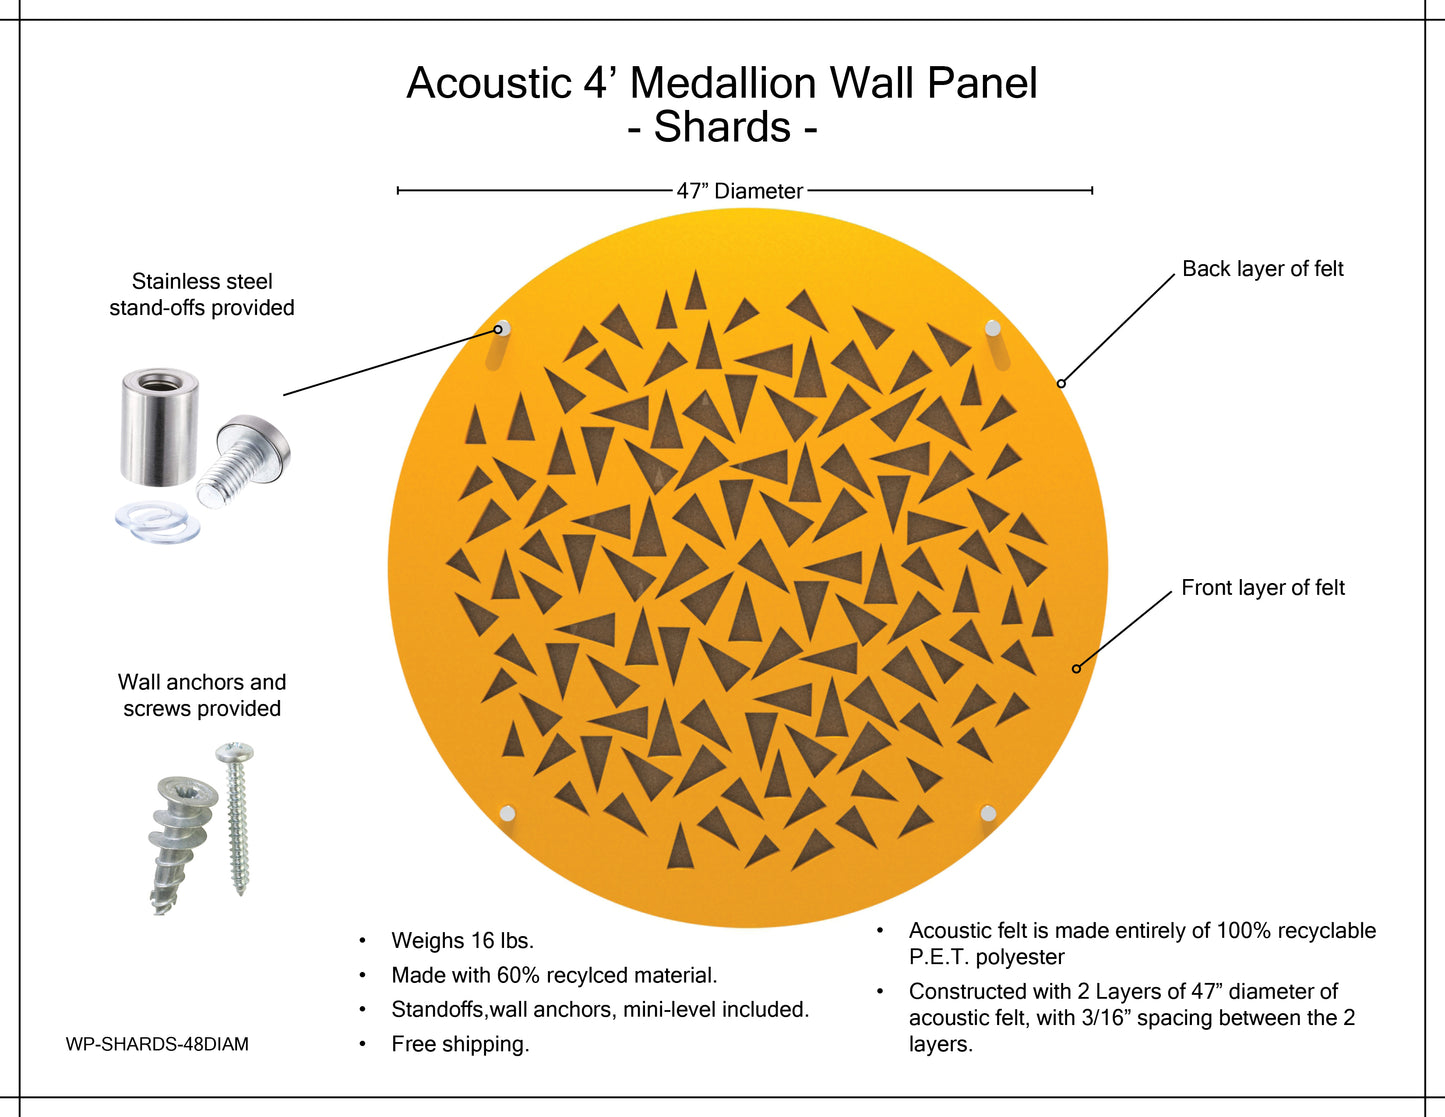 Medallion Acoustic Wall Panel - Shards